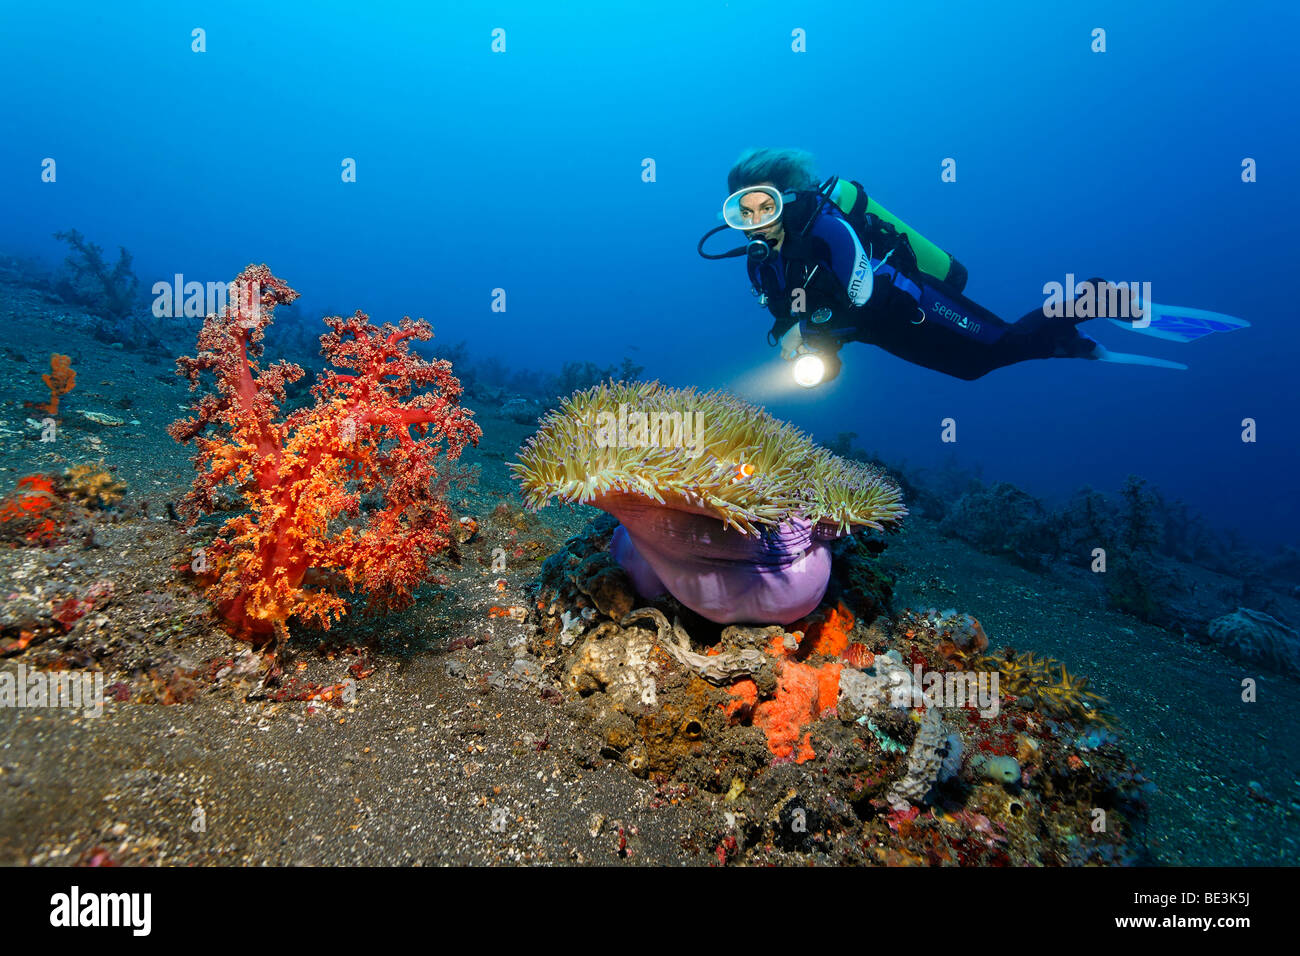 Underwater scenery with large soft coral, Magnificent sea anemone (Heteractis magnifica) and a diver, Kuda, Bali, Indonesia, Pa Stock Photo